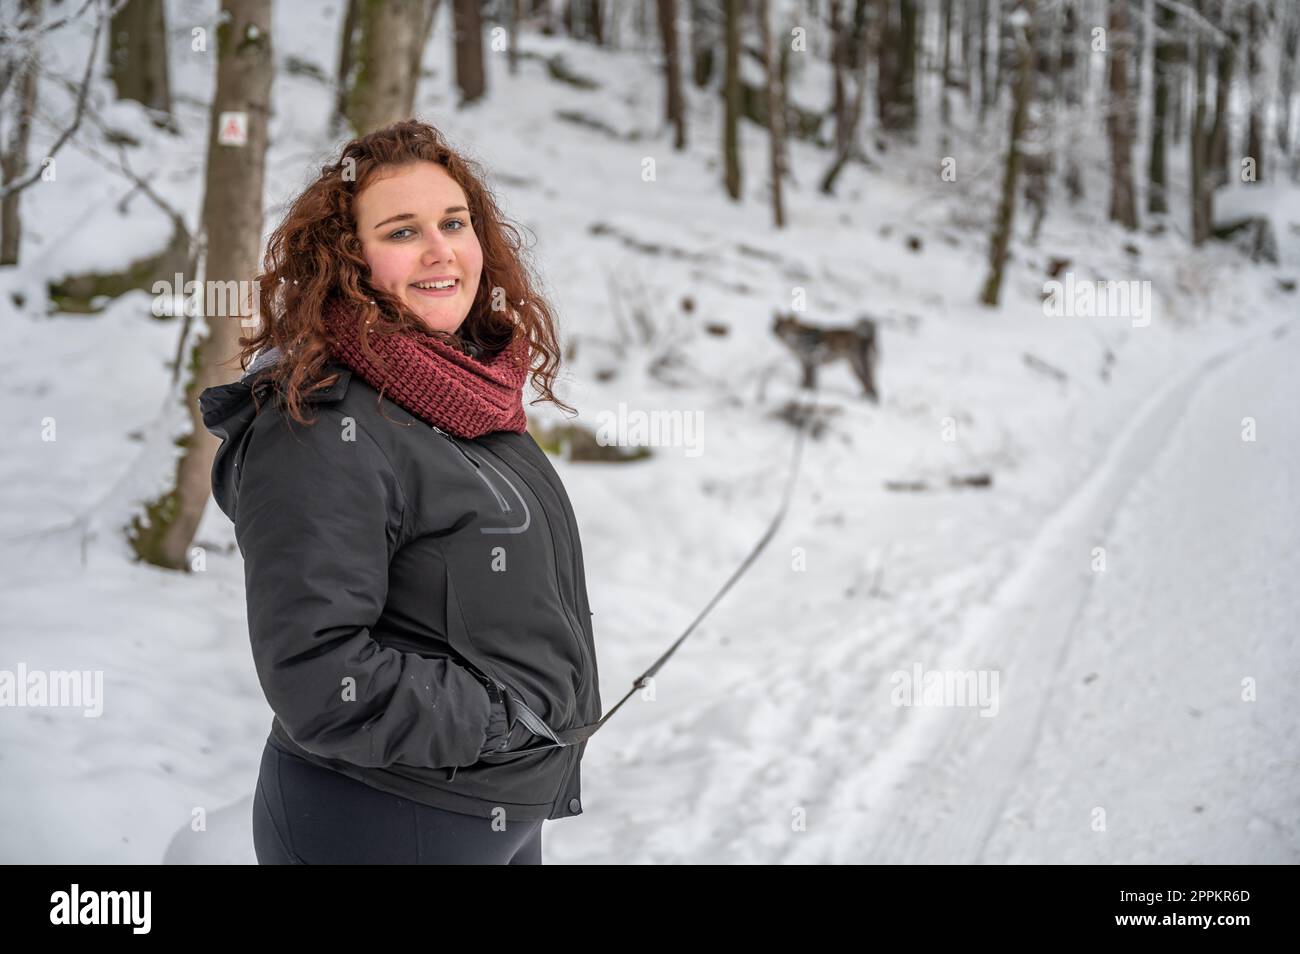 Young woman with brown curly hair and warm clothing is smiling and looking at camera, walks her gray colored akita inu dog in the forest during winter with lots of snow Stock Photo